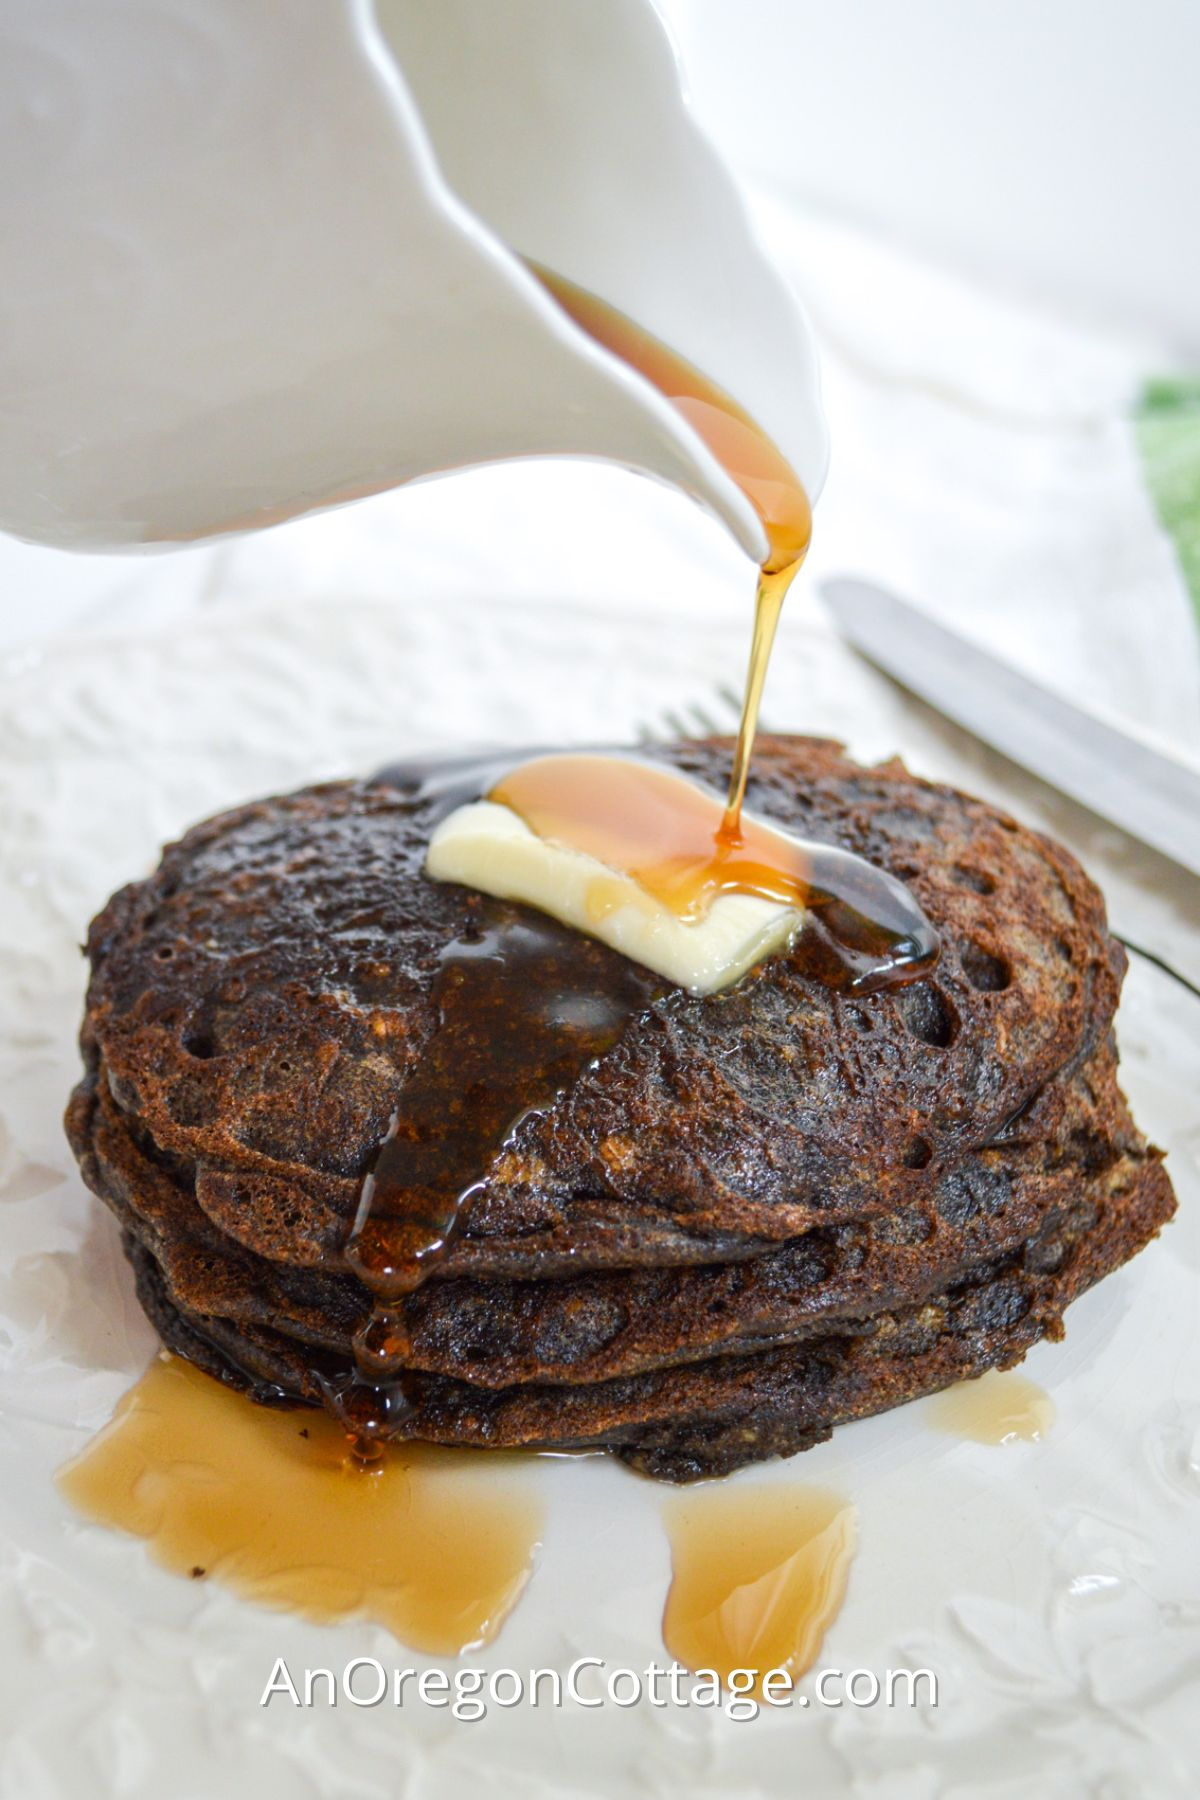 pouring syrup on buckwheat pancakes